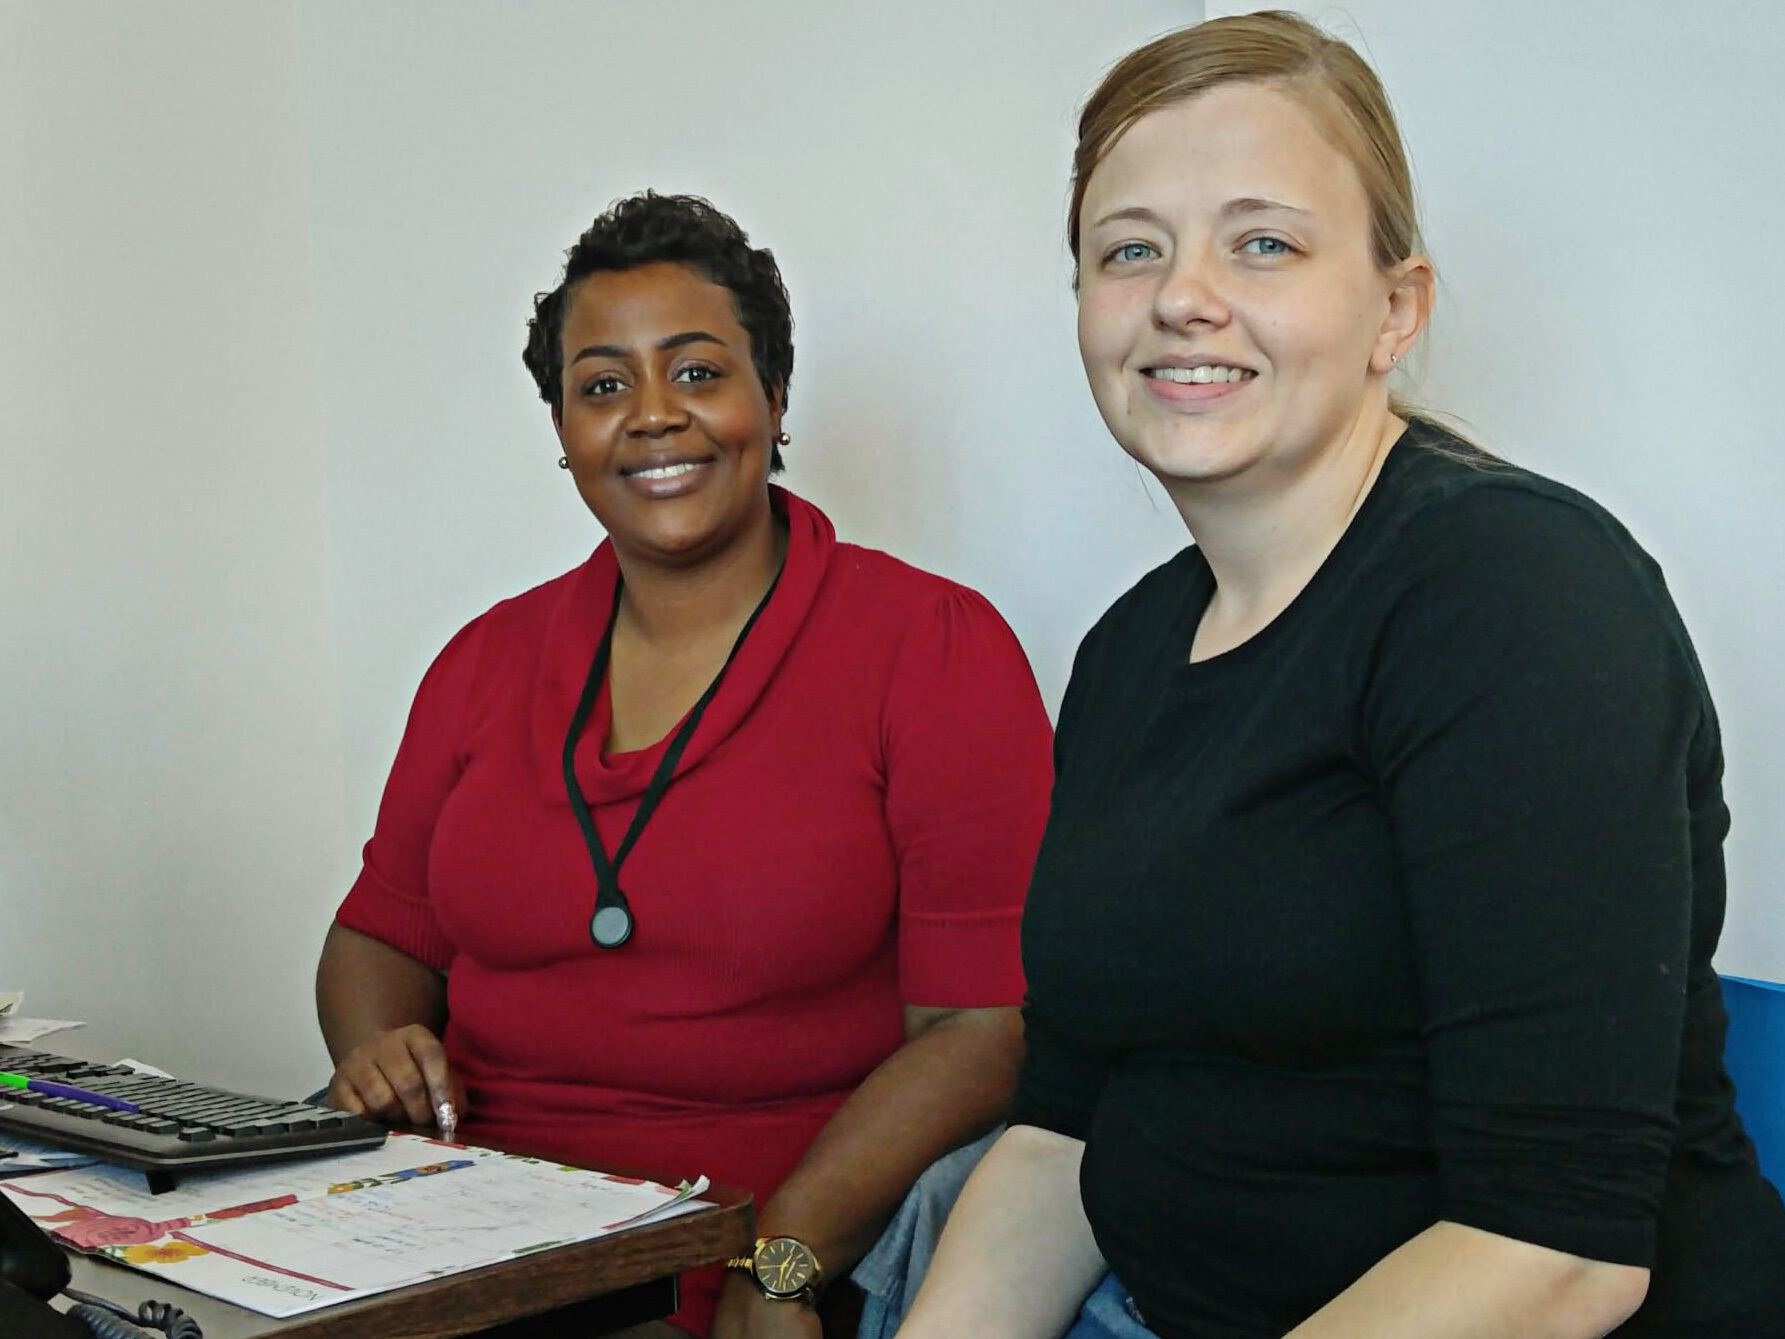 Sharita Moultrie, left, a navigator with the Palmetto Project, helps Stephanie Hickman enroll in an Obamacare plan in Columbia, S.C. (Photo by Phil Galewitz/Kaiser Health News)